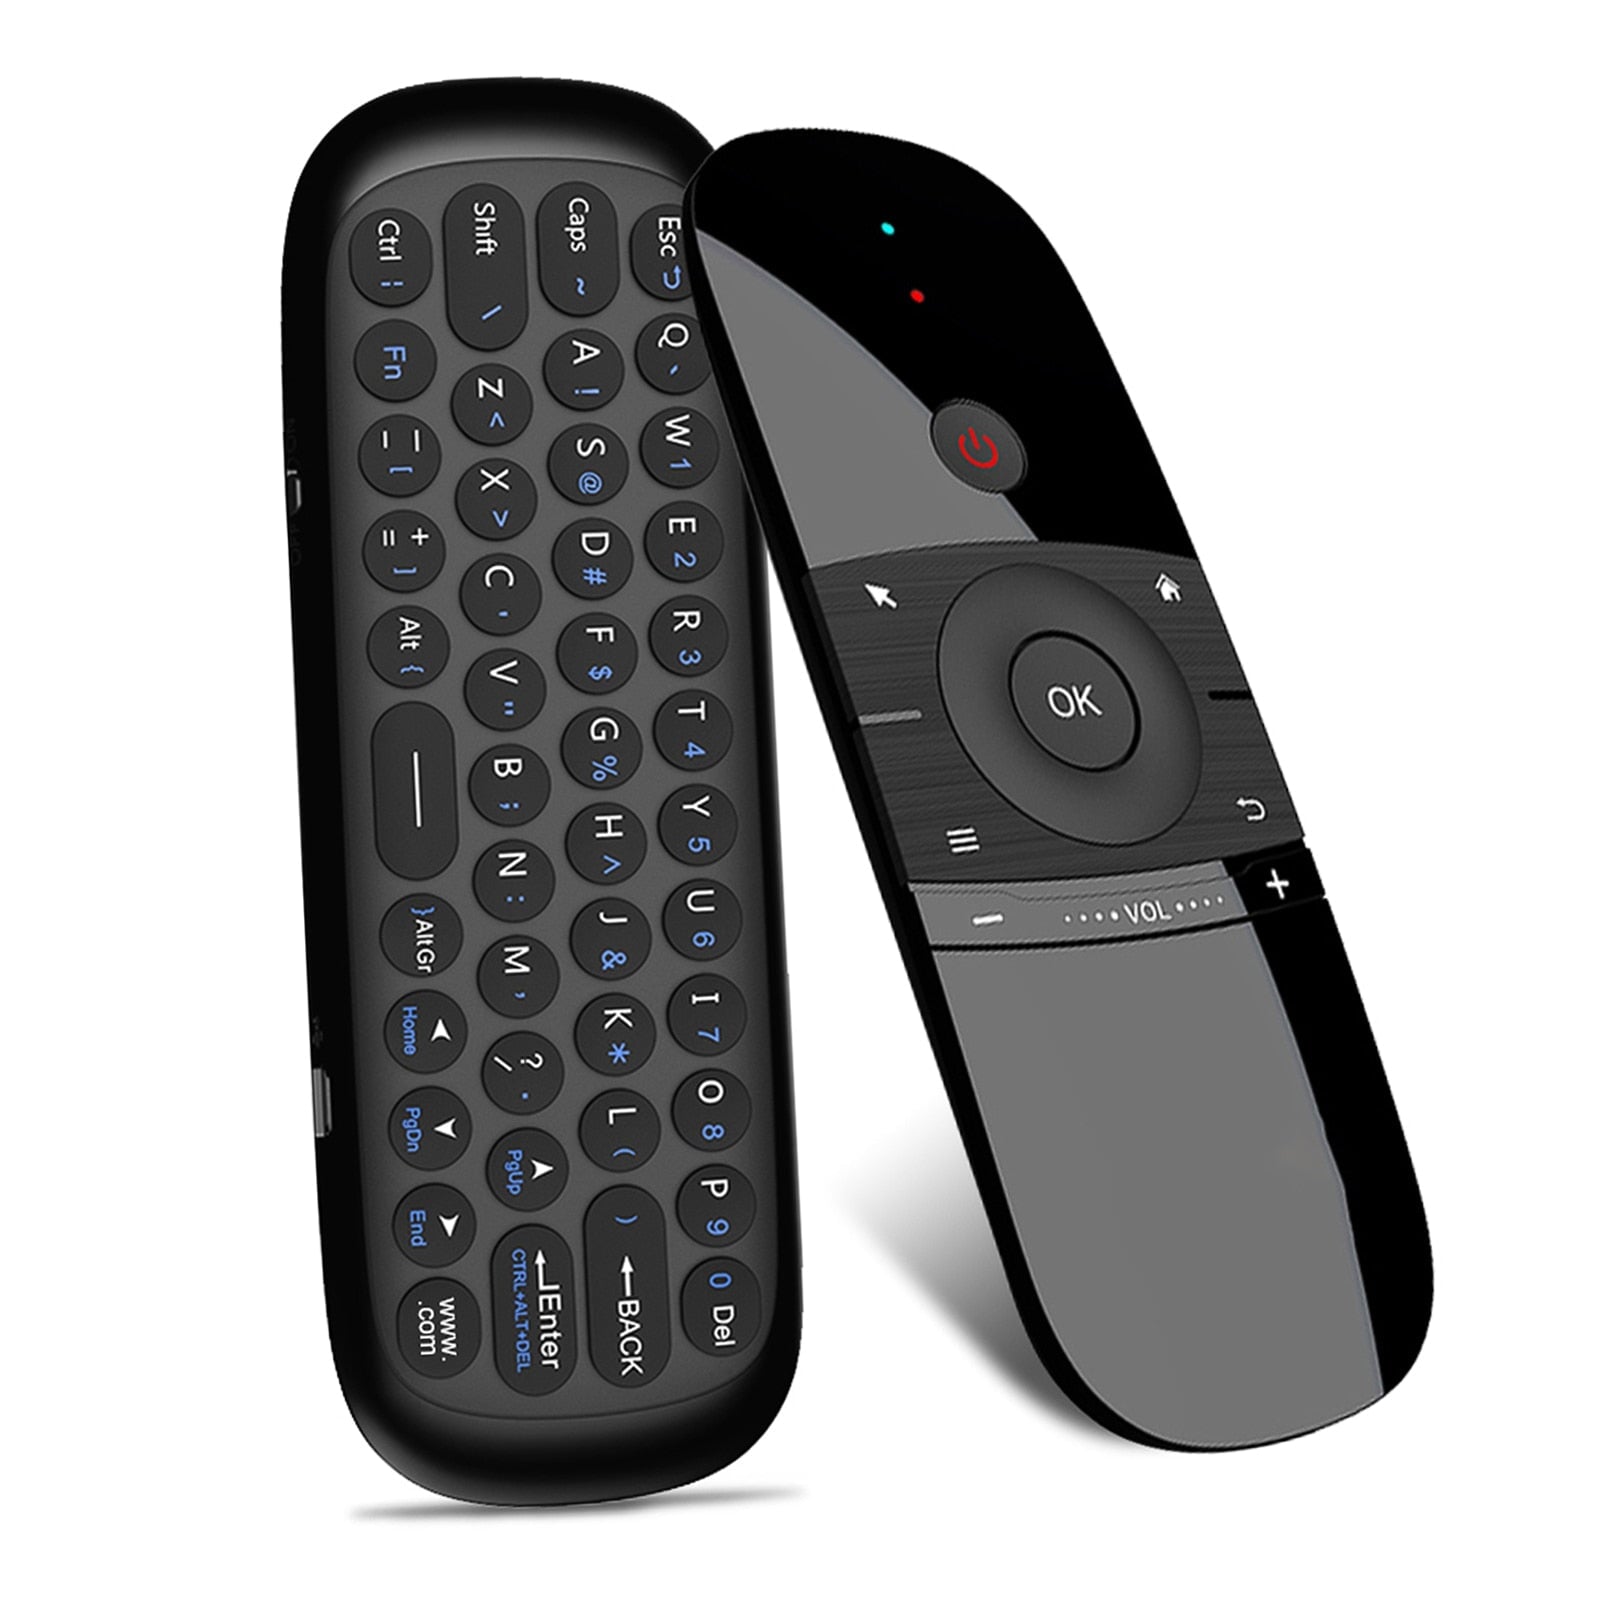 Wechip W1 Air Mouse 2.4G Wireless Keyboard Remote Control IR Remote Learning 6-Axis Motion Sense for Smart TV Android TV Box PC 0 Raffiniertedinge China black 